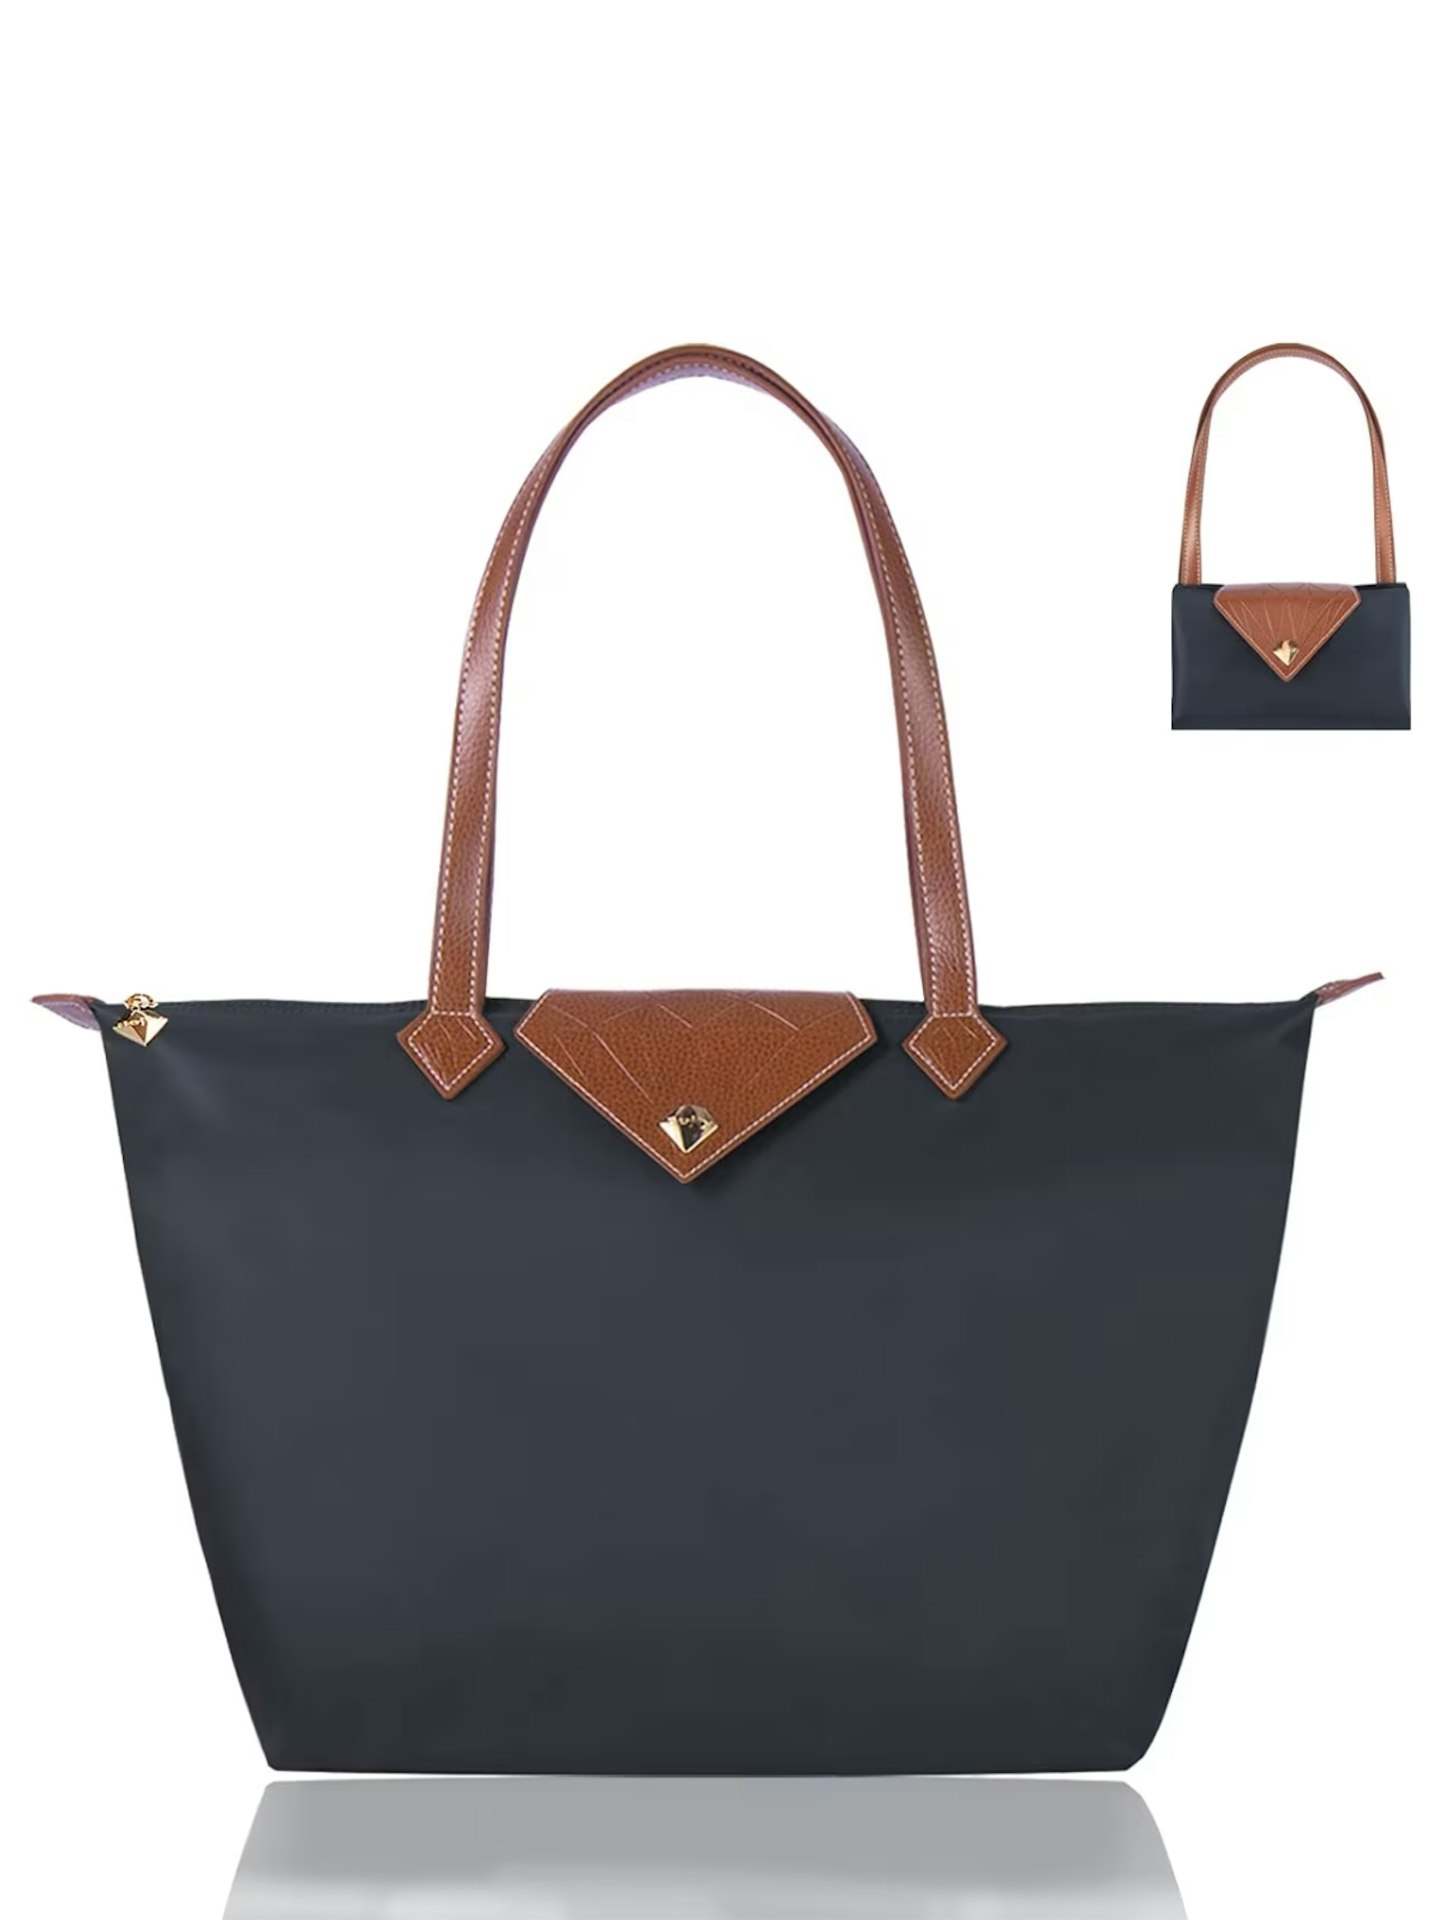 BOJLY Tote Bags For Women